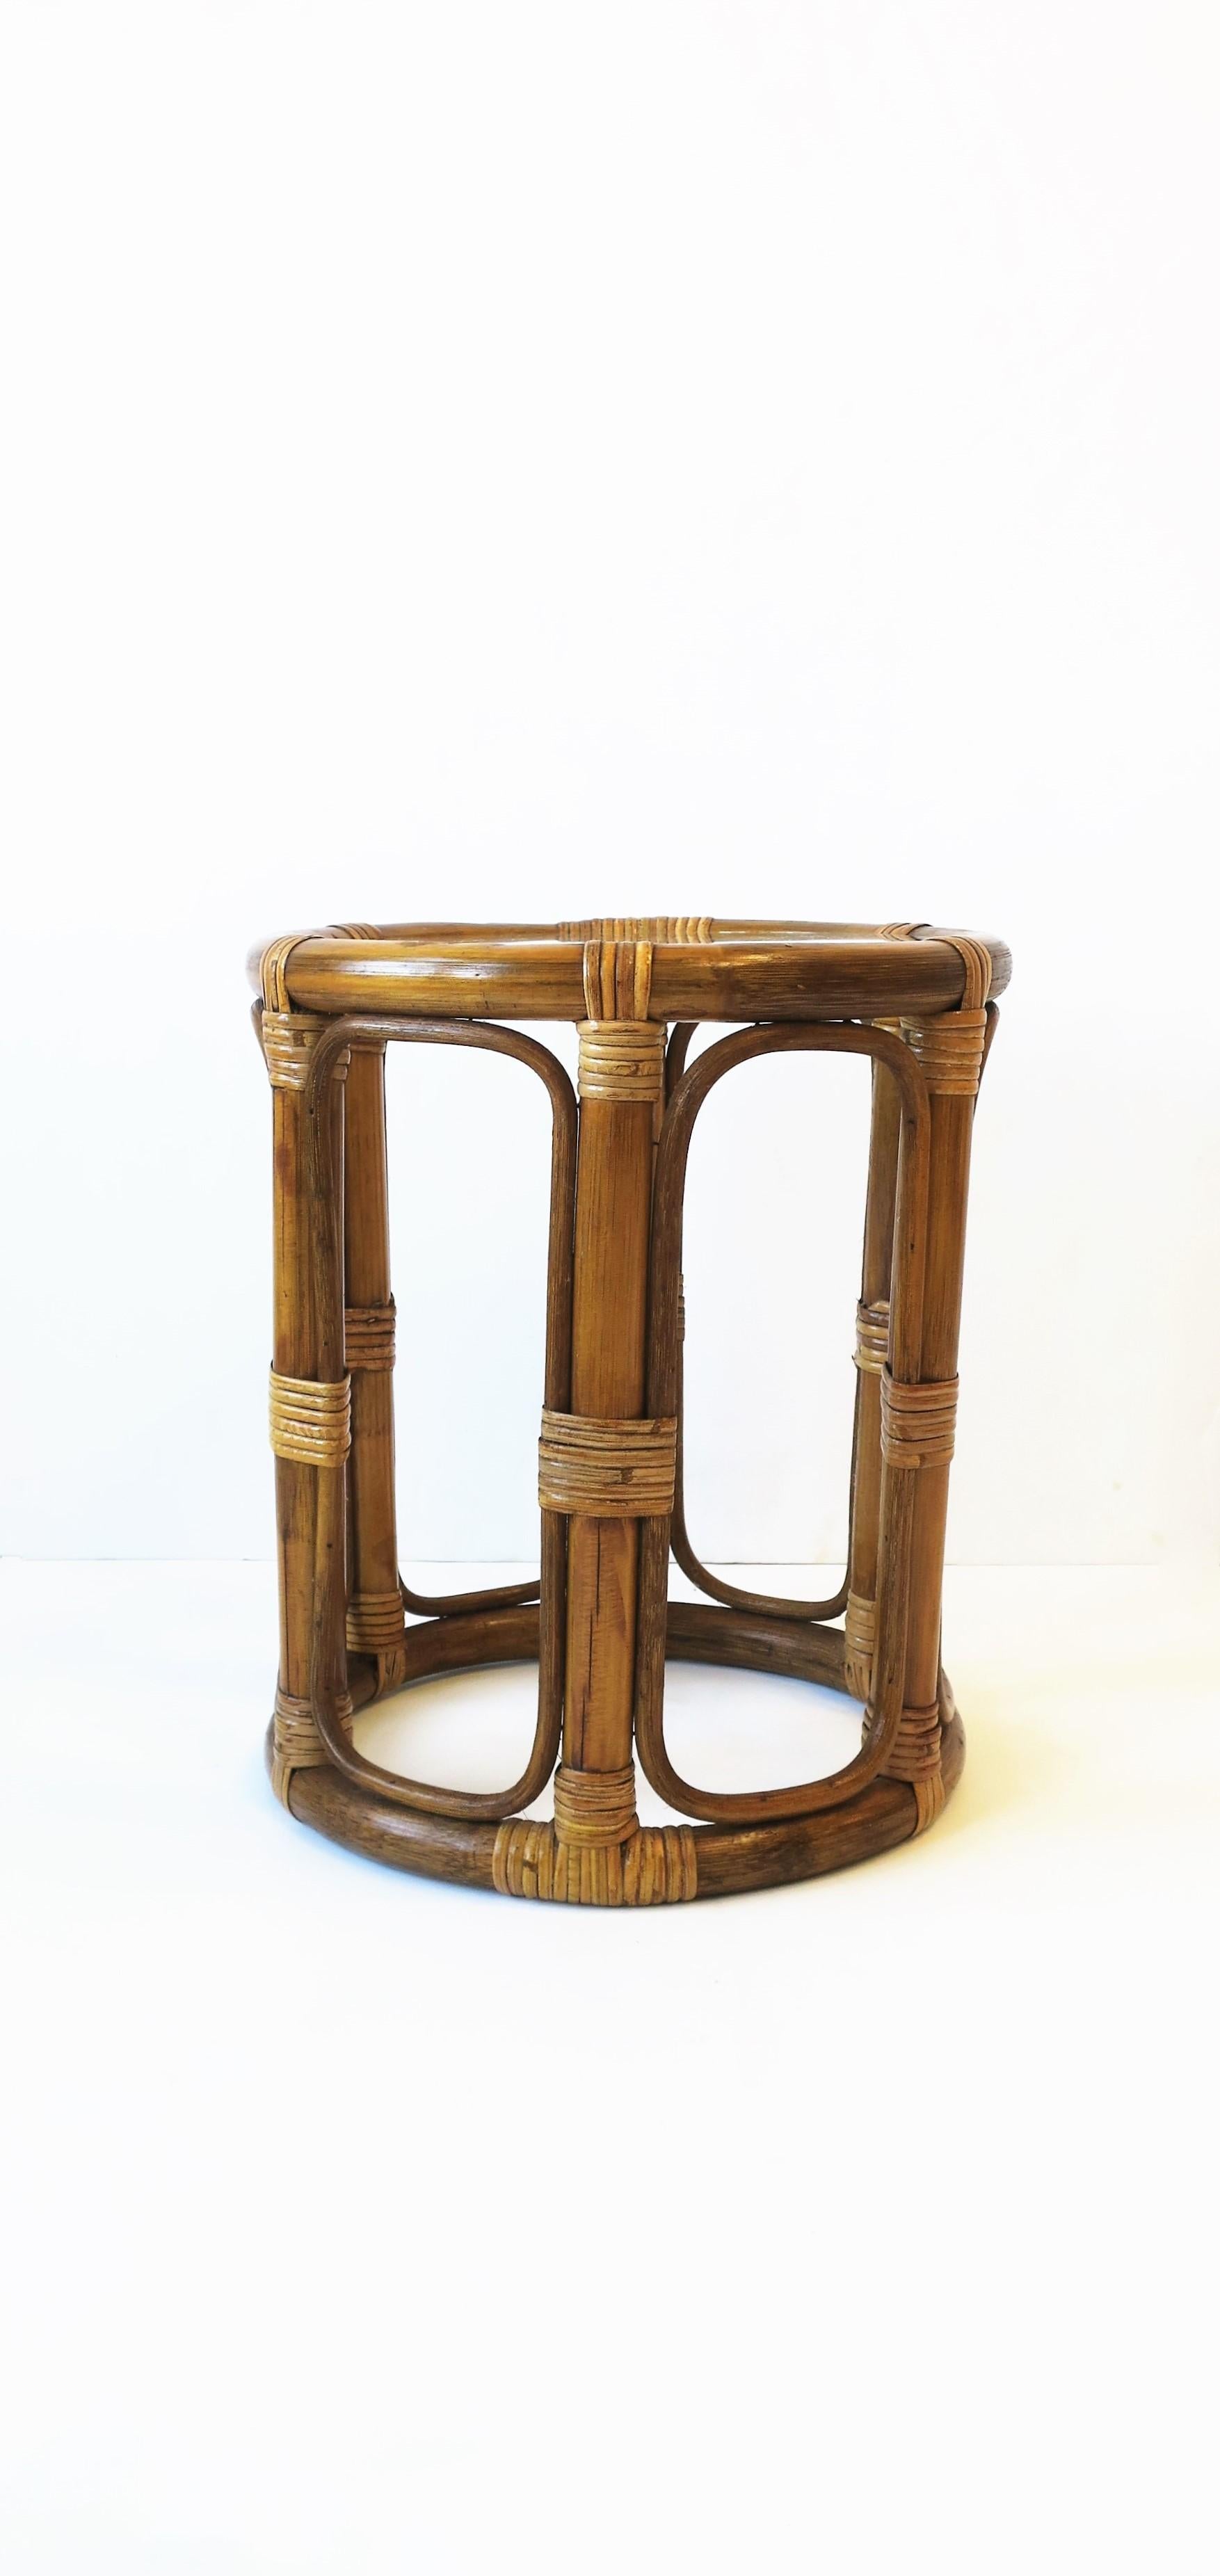 A small wicker rattan bentwood round side/drinks table with glass top, circa late-20th century. Dimensions: 12